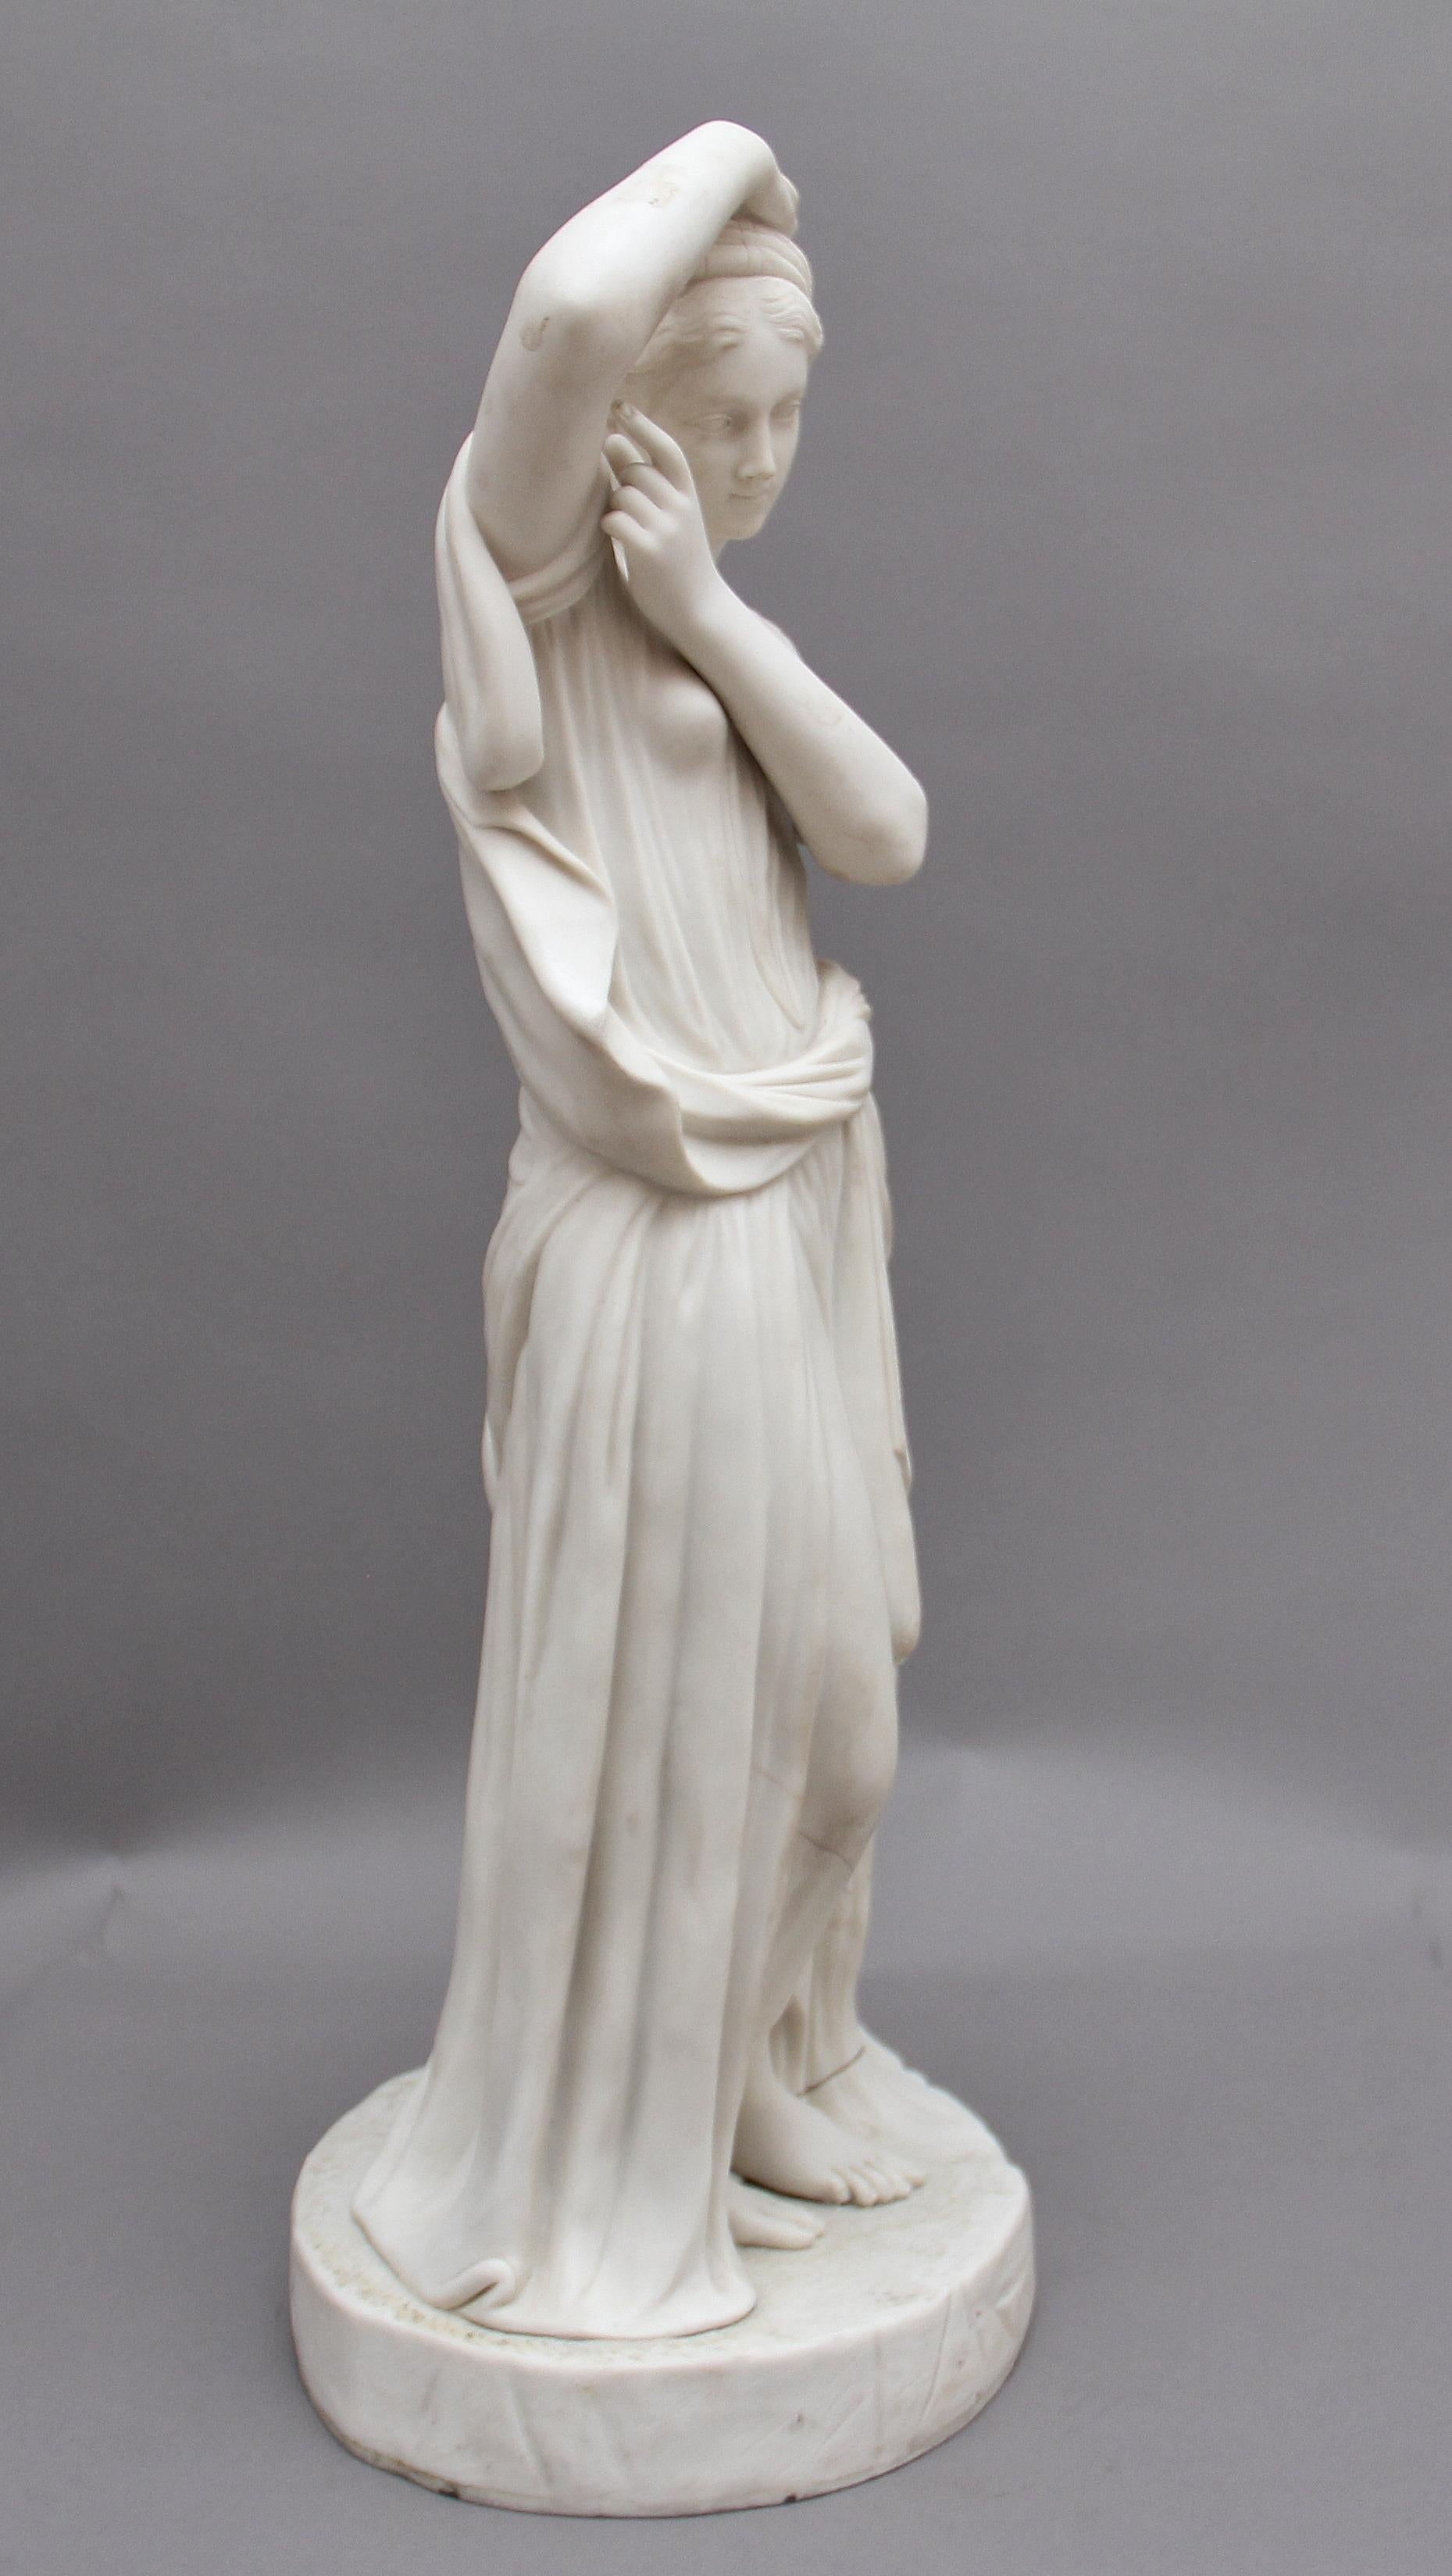 A superb quality 19th century parian figure of a Greek lady, the figure shows the lady dressed in a typical Greek dress standing next to a boulder with a water jug on top. There are some cracks on the base but all in all in great condition. Circa